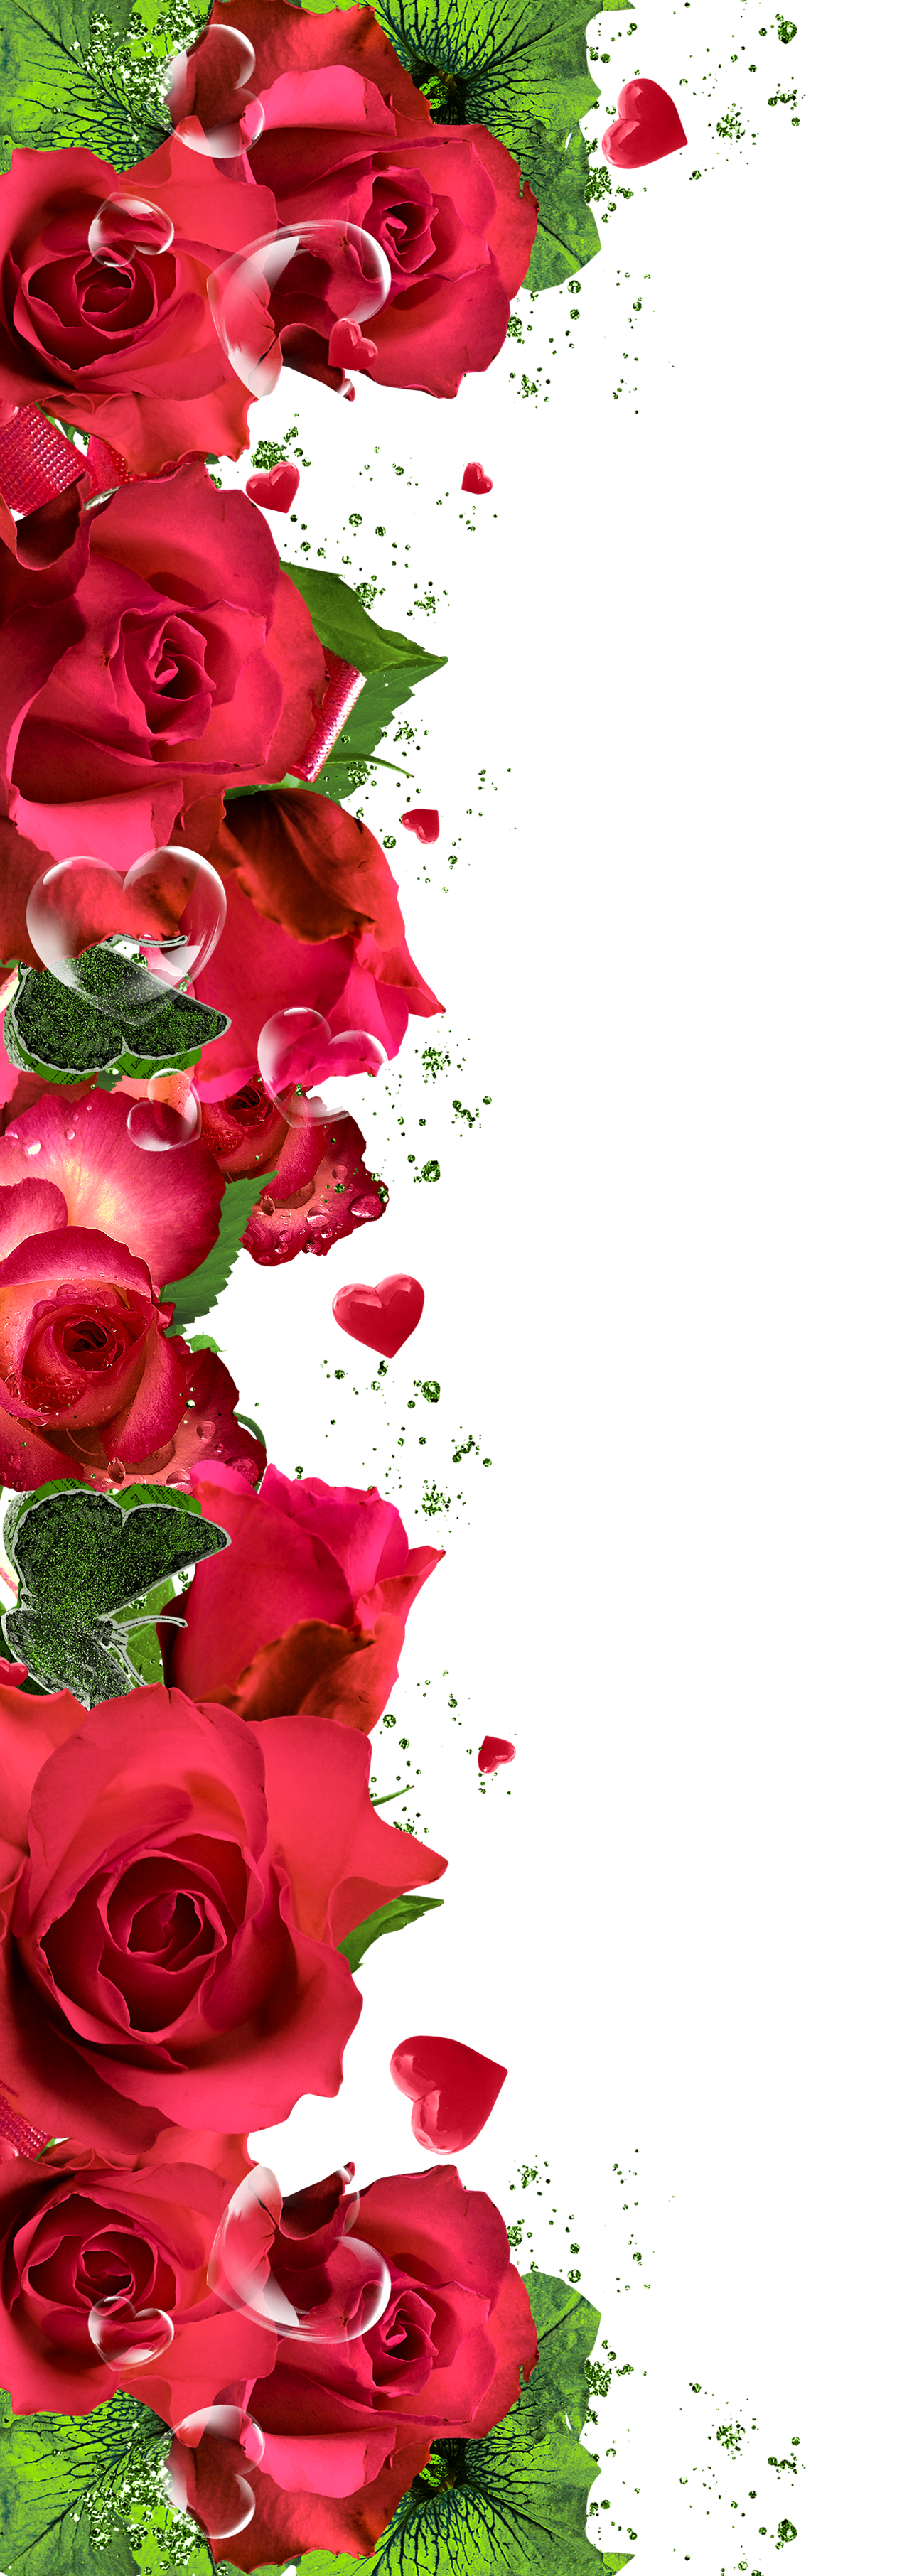 Clipart roses bed. Red ornament decor png